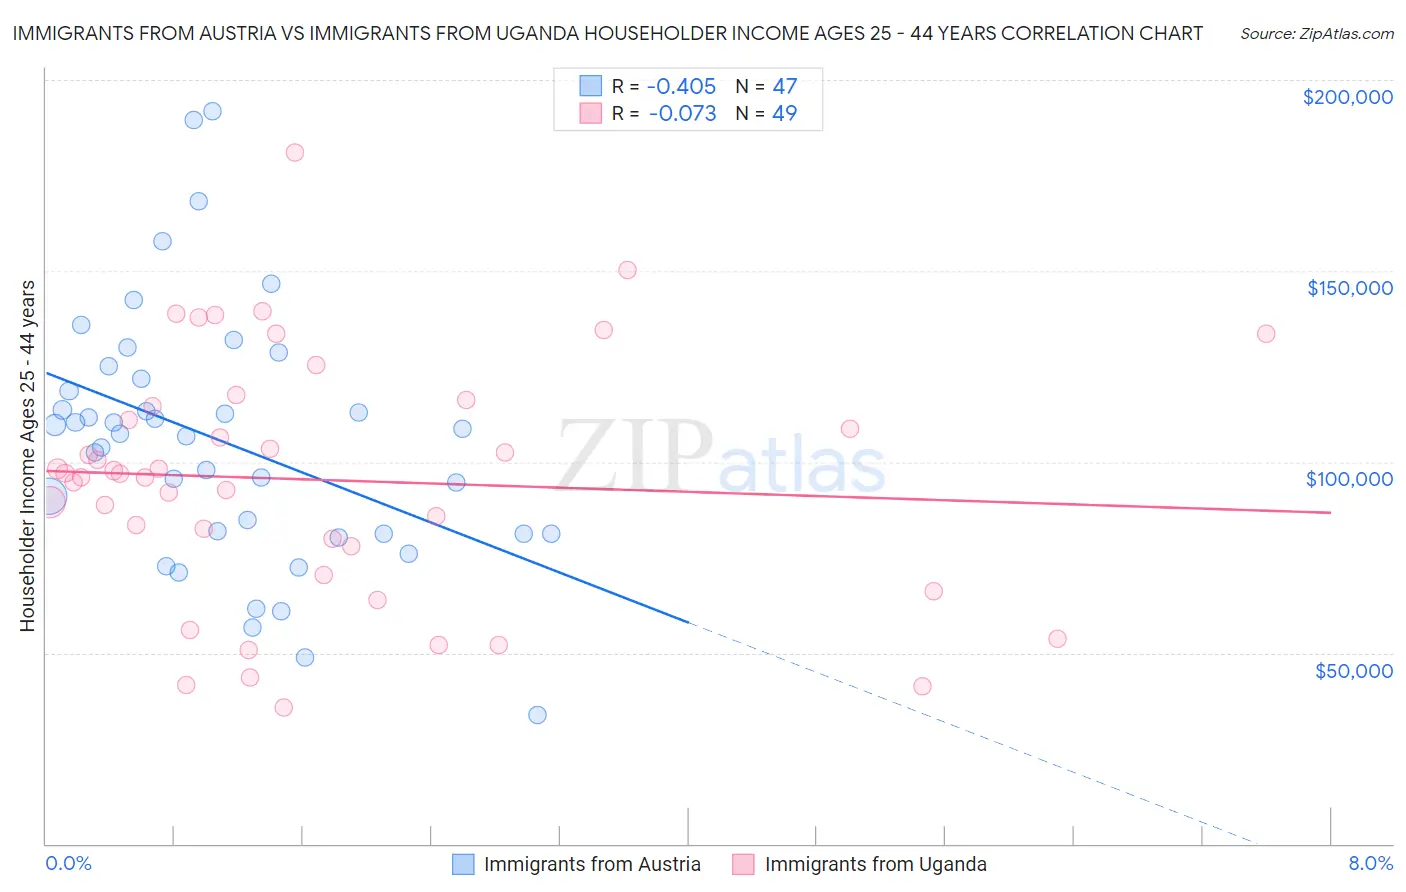 Immigrants from Austria vs Immigrants from Uganda Householder Income Ages 25 - 44 years